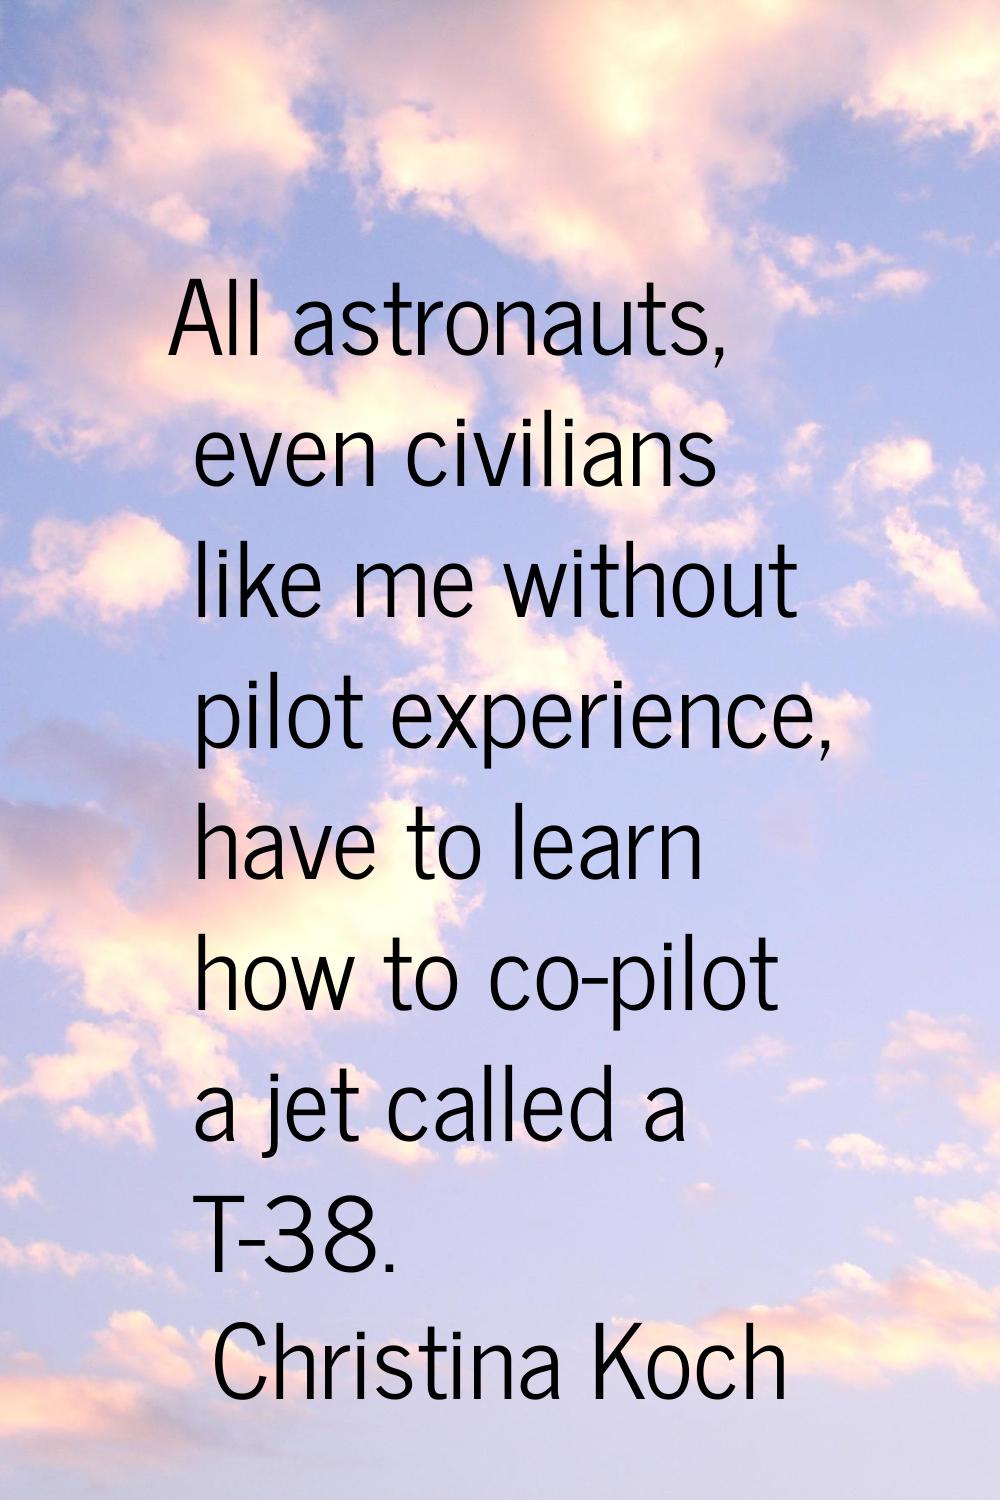 All astronauts, even civilians like me without pilot experience, have to learn how to co-pilot a je